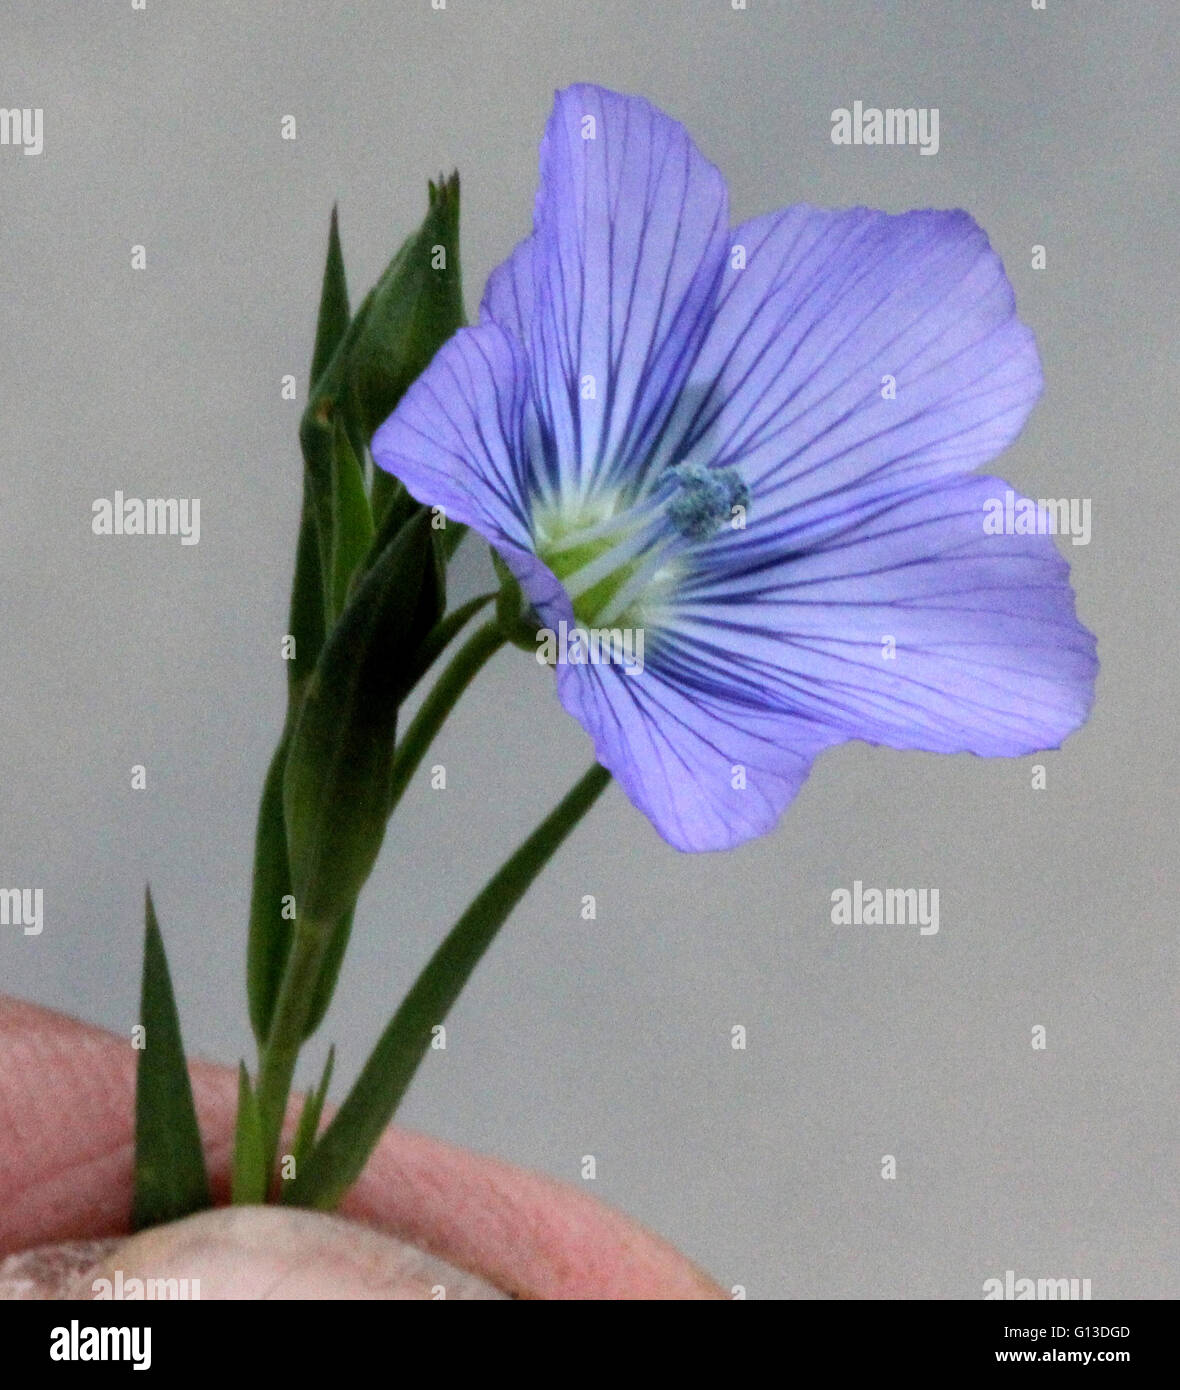 Linum usitatissimum, Common flax, linseed, cultivated annual herb with linear leaves and blue flowers used as fiber crop and oil Stock Photo